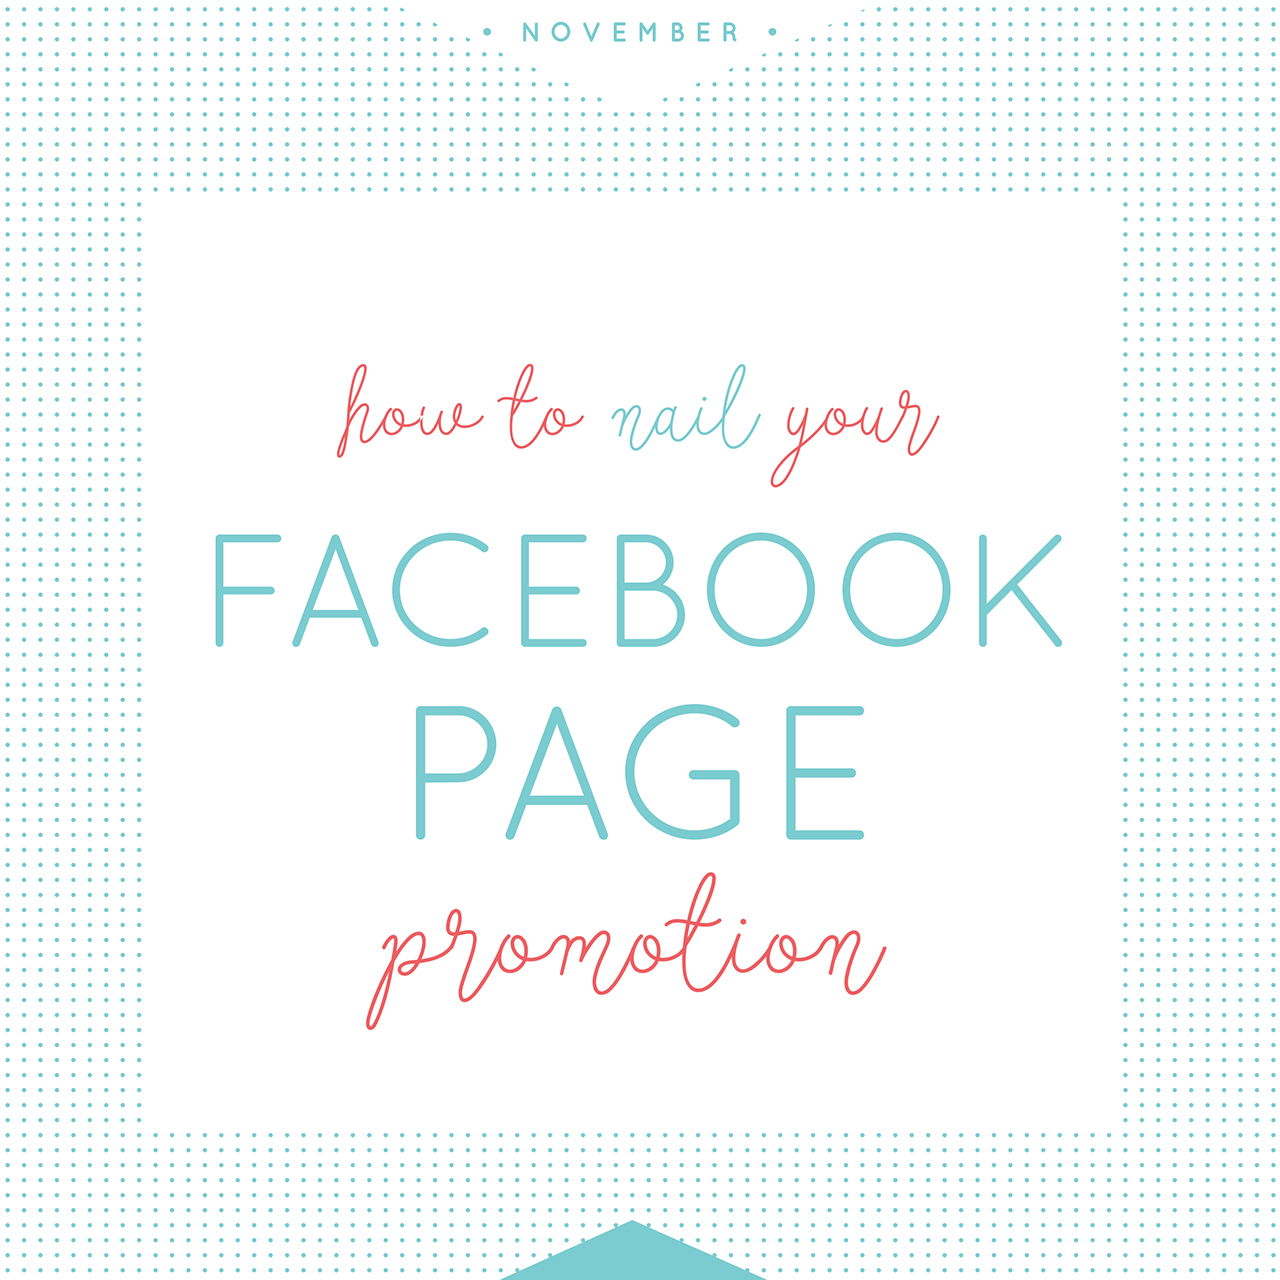 Facebook page promotion photographers